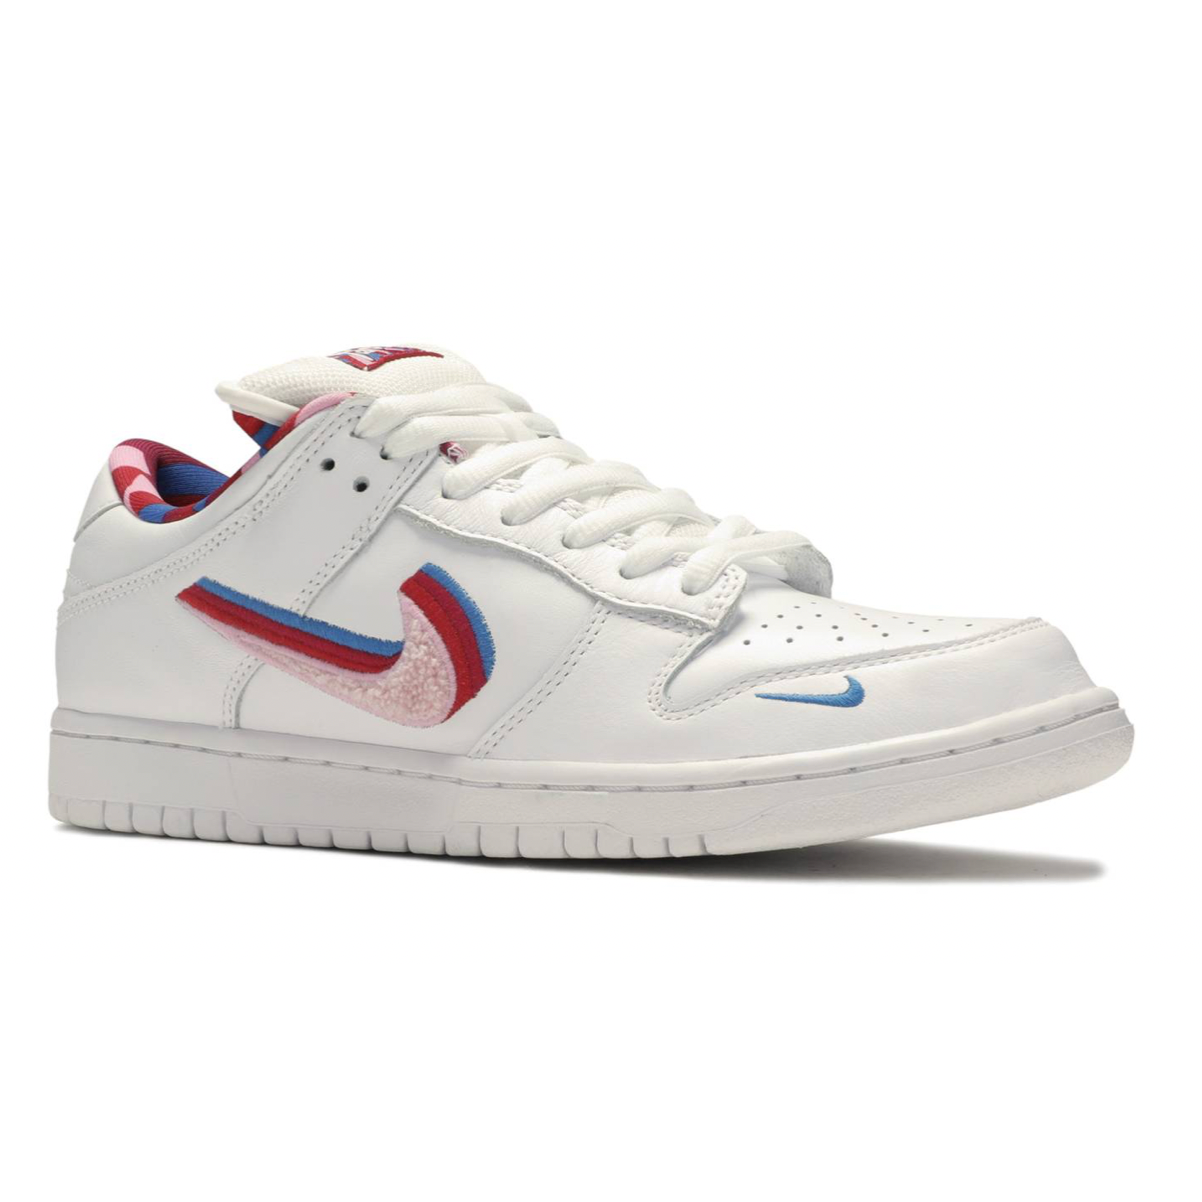 Nike SB Dunk Low Parra from Nike